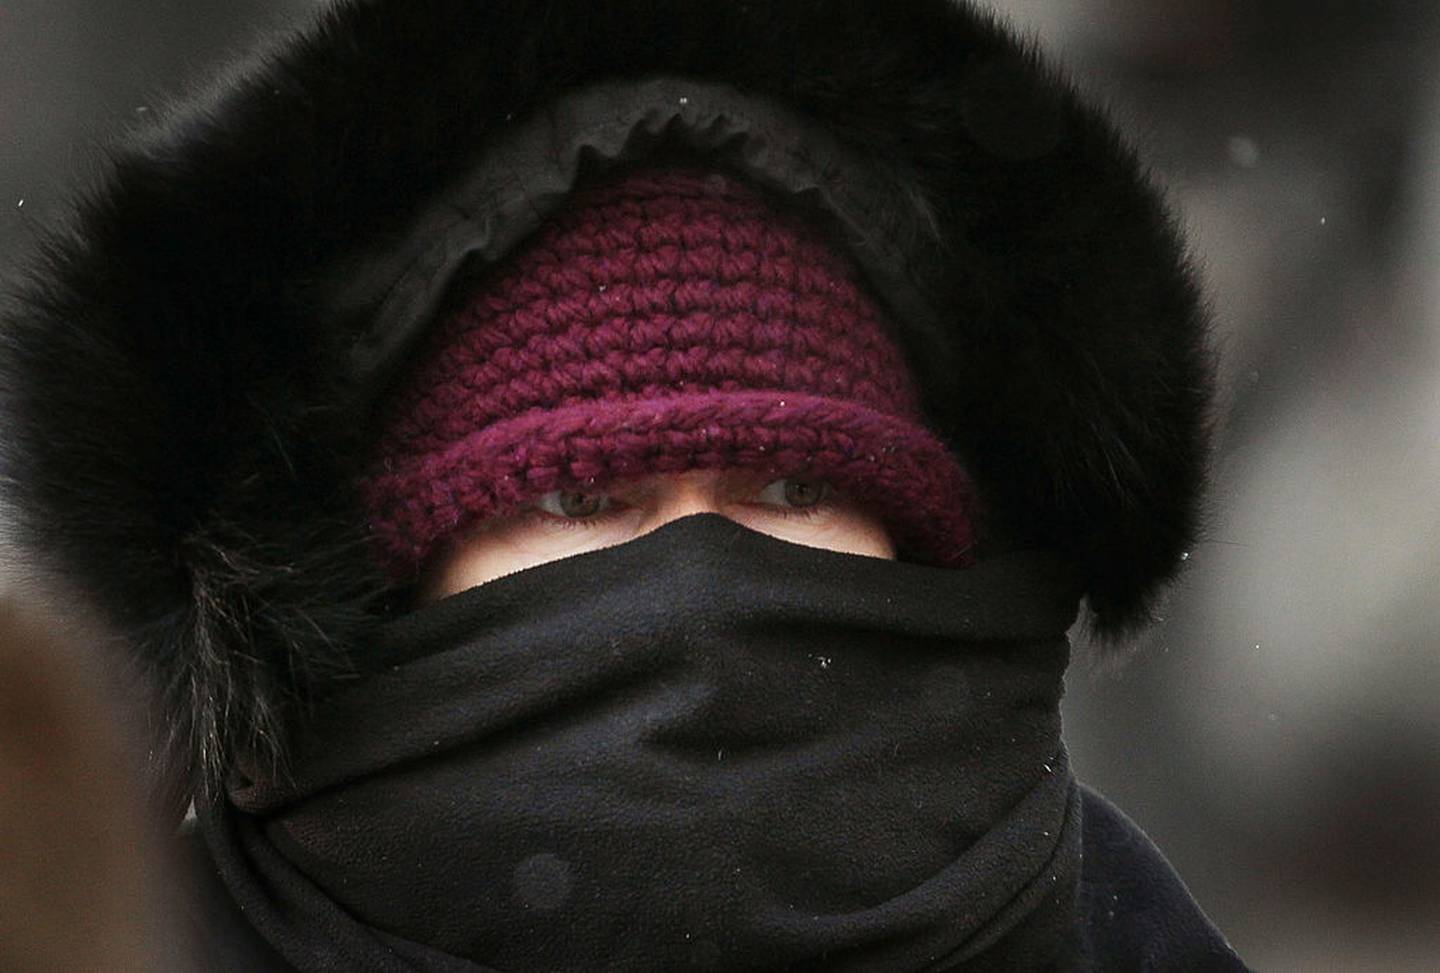 CHICAGO, IL - DECEMBER 13:  A commuter makes her way through downtown as temperatures hovered in the single digits during the morning rush hour December 13, 2010 in Chicago, Illinois. With wind gusts up to 40 miles per hour the wind chill temperatures in the city have been around -10 degrees.